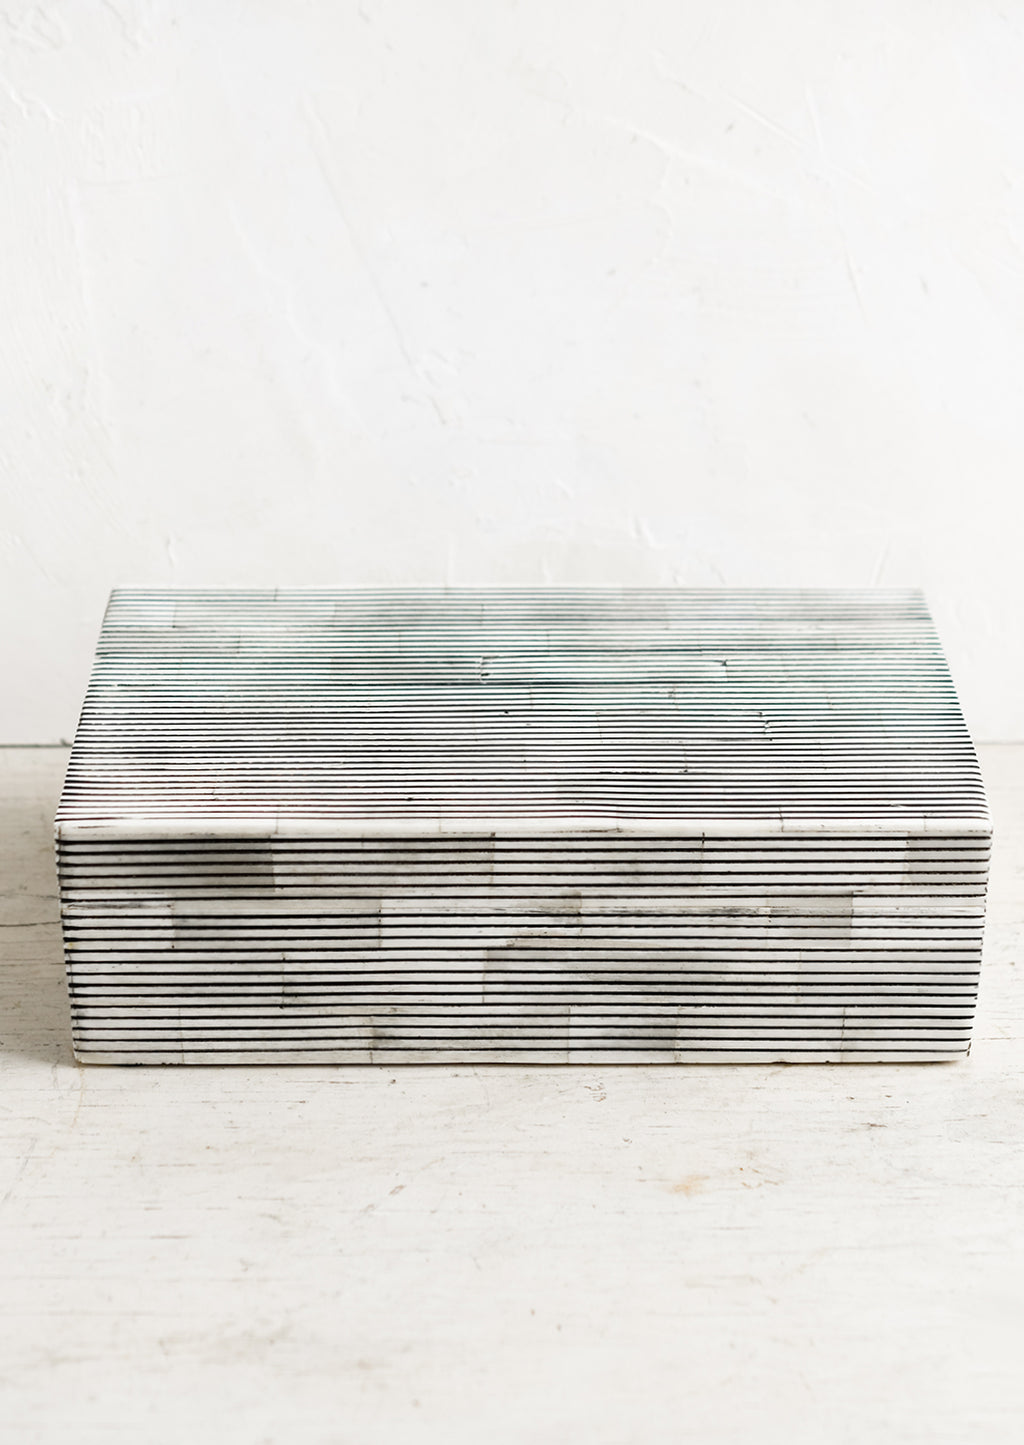 Large: A large lidded storage box made from black & white striped bone.